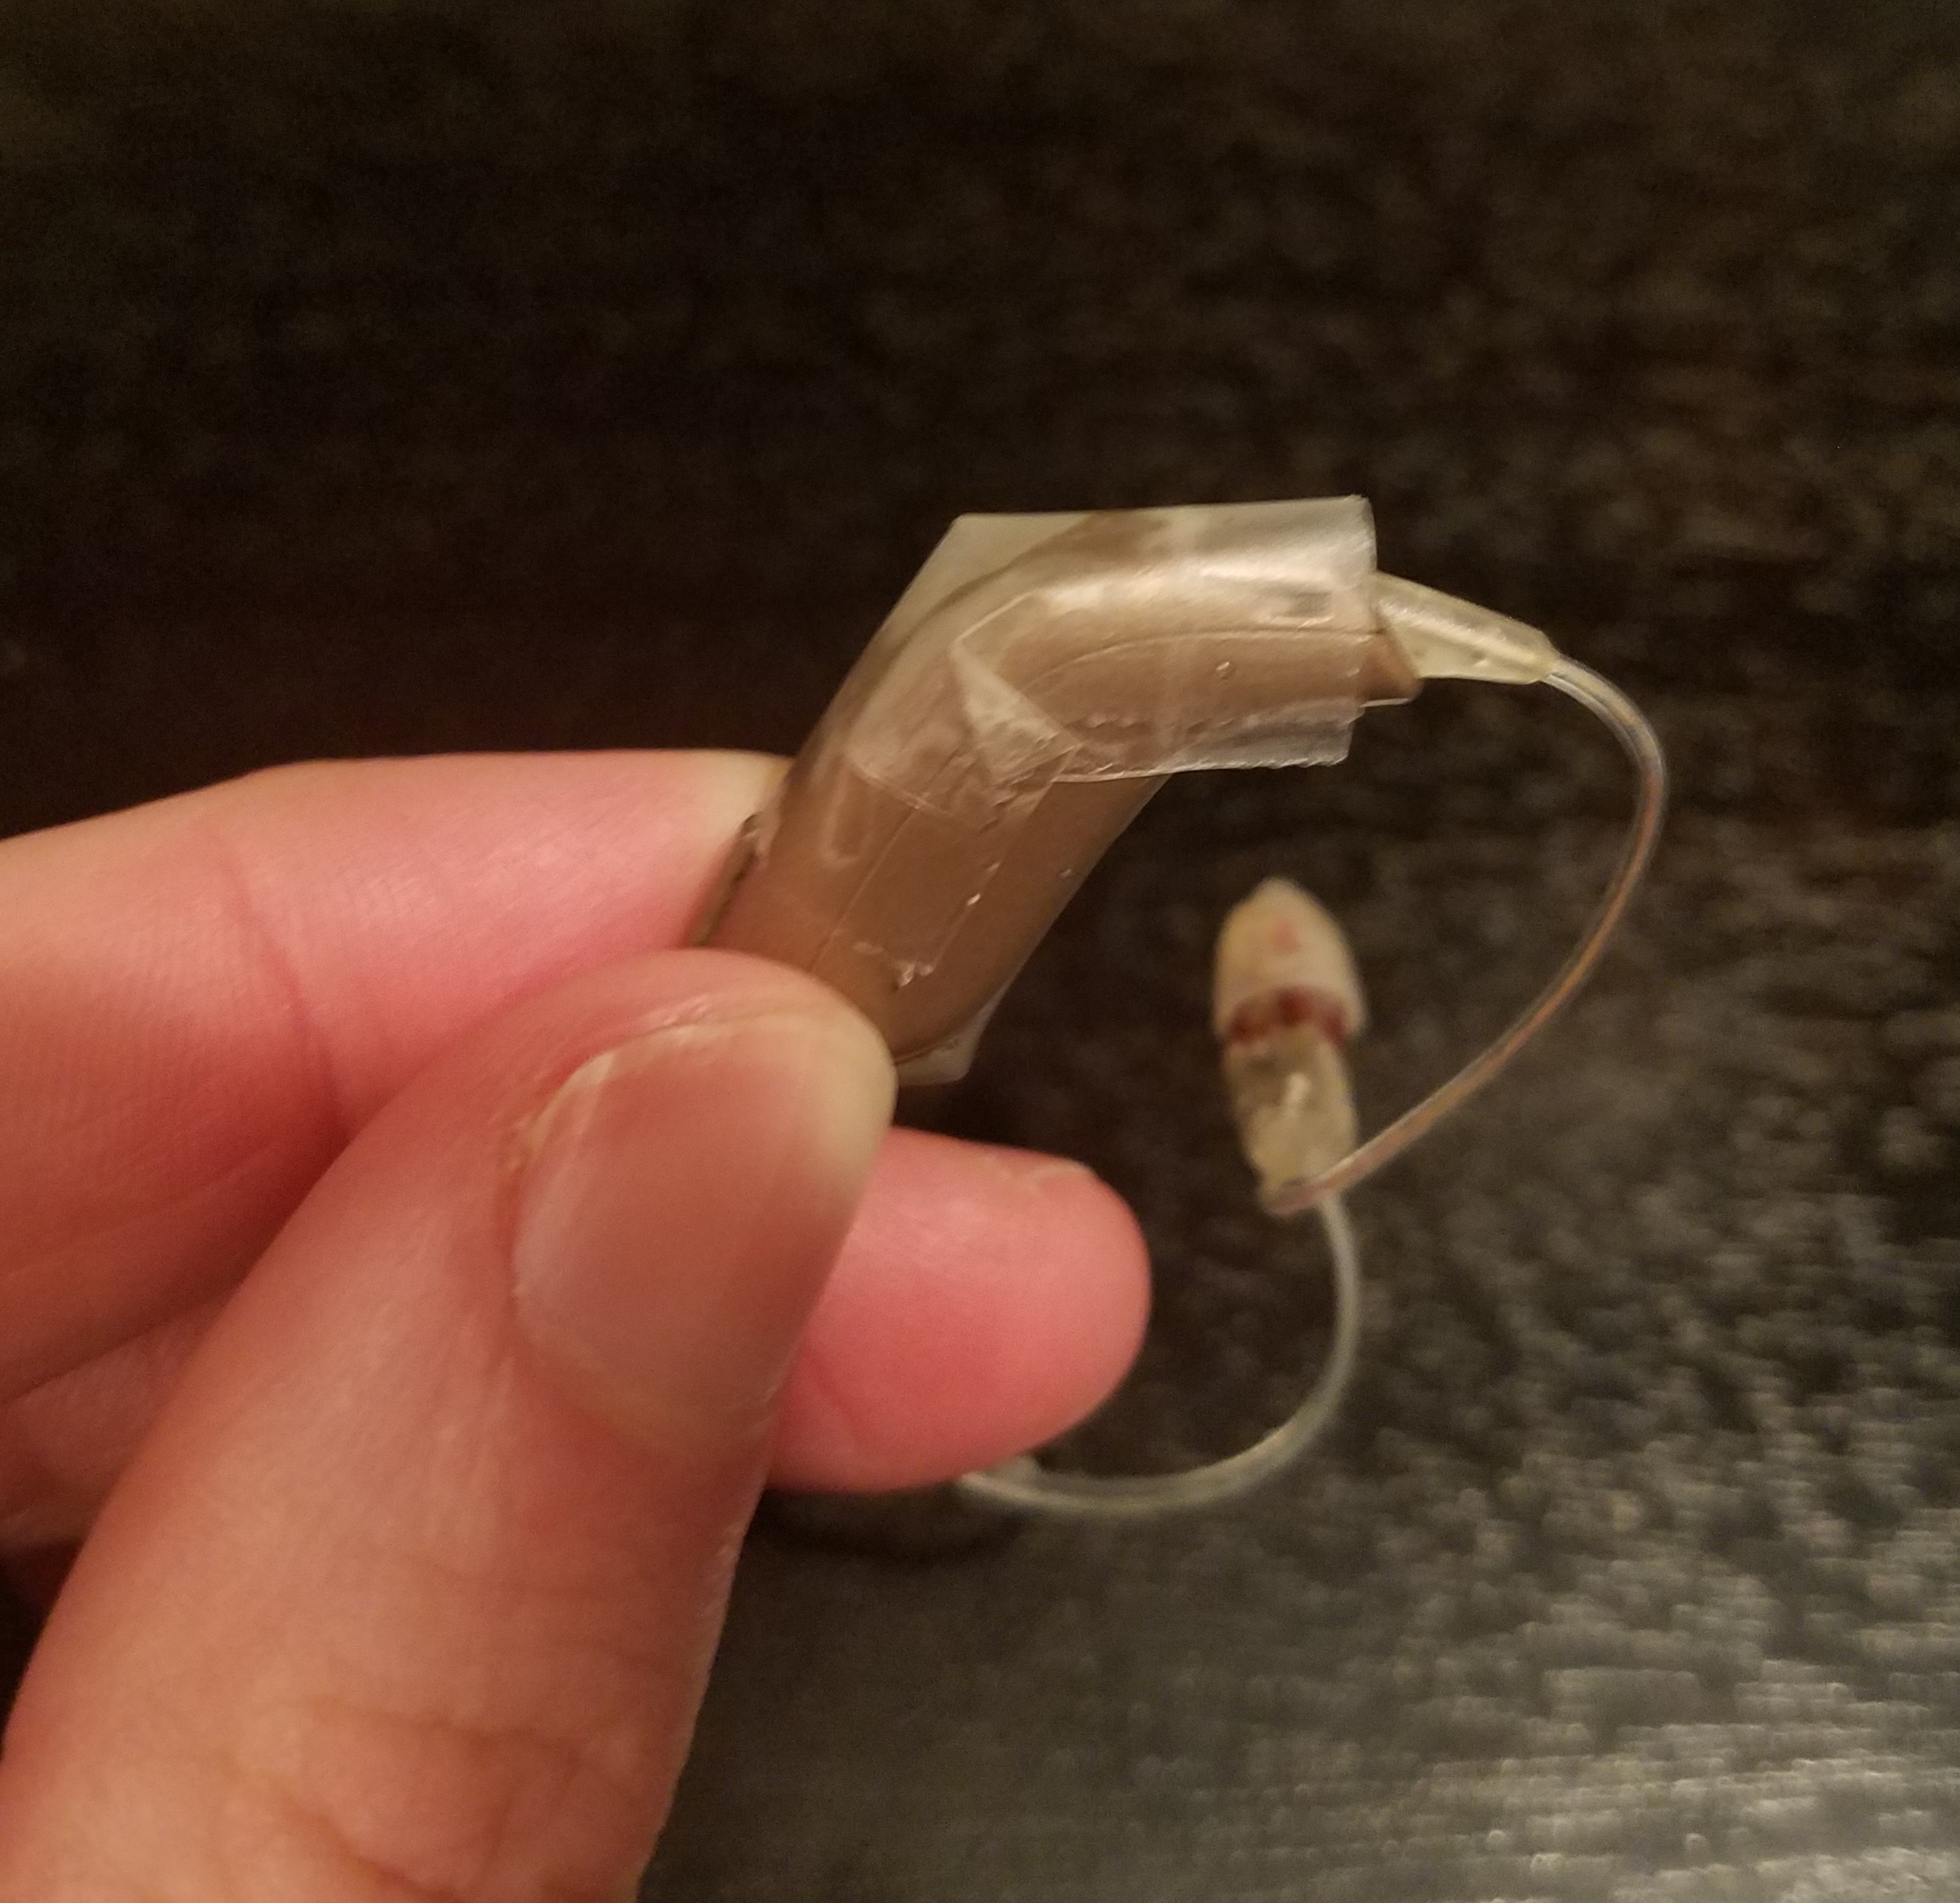 Hearing aid with tape over the microphone